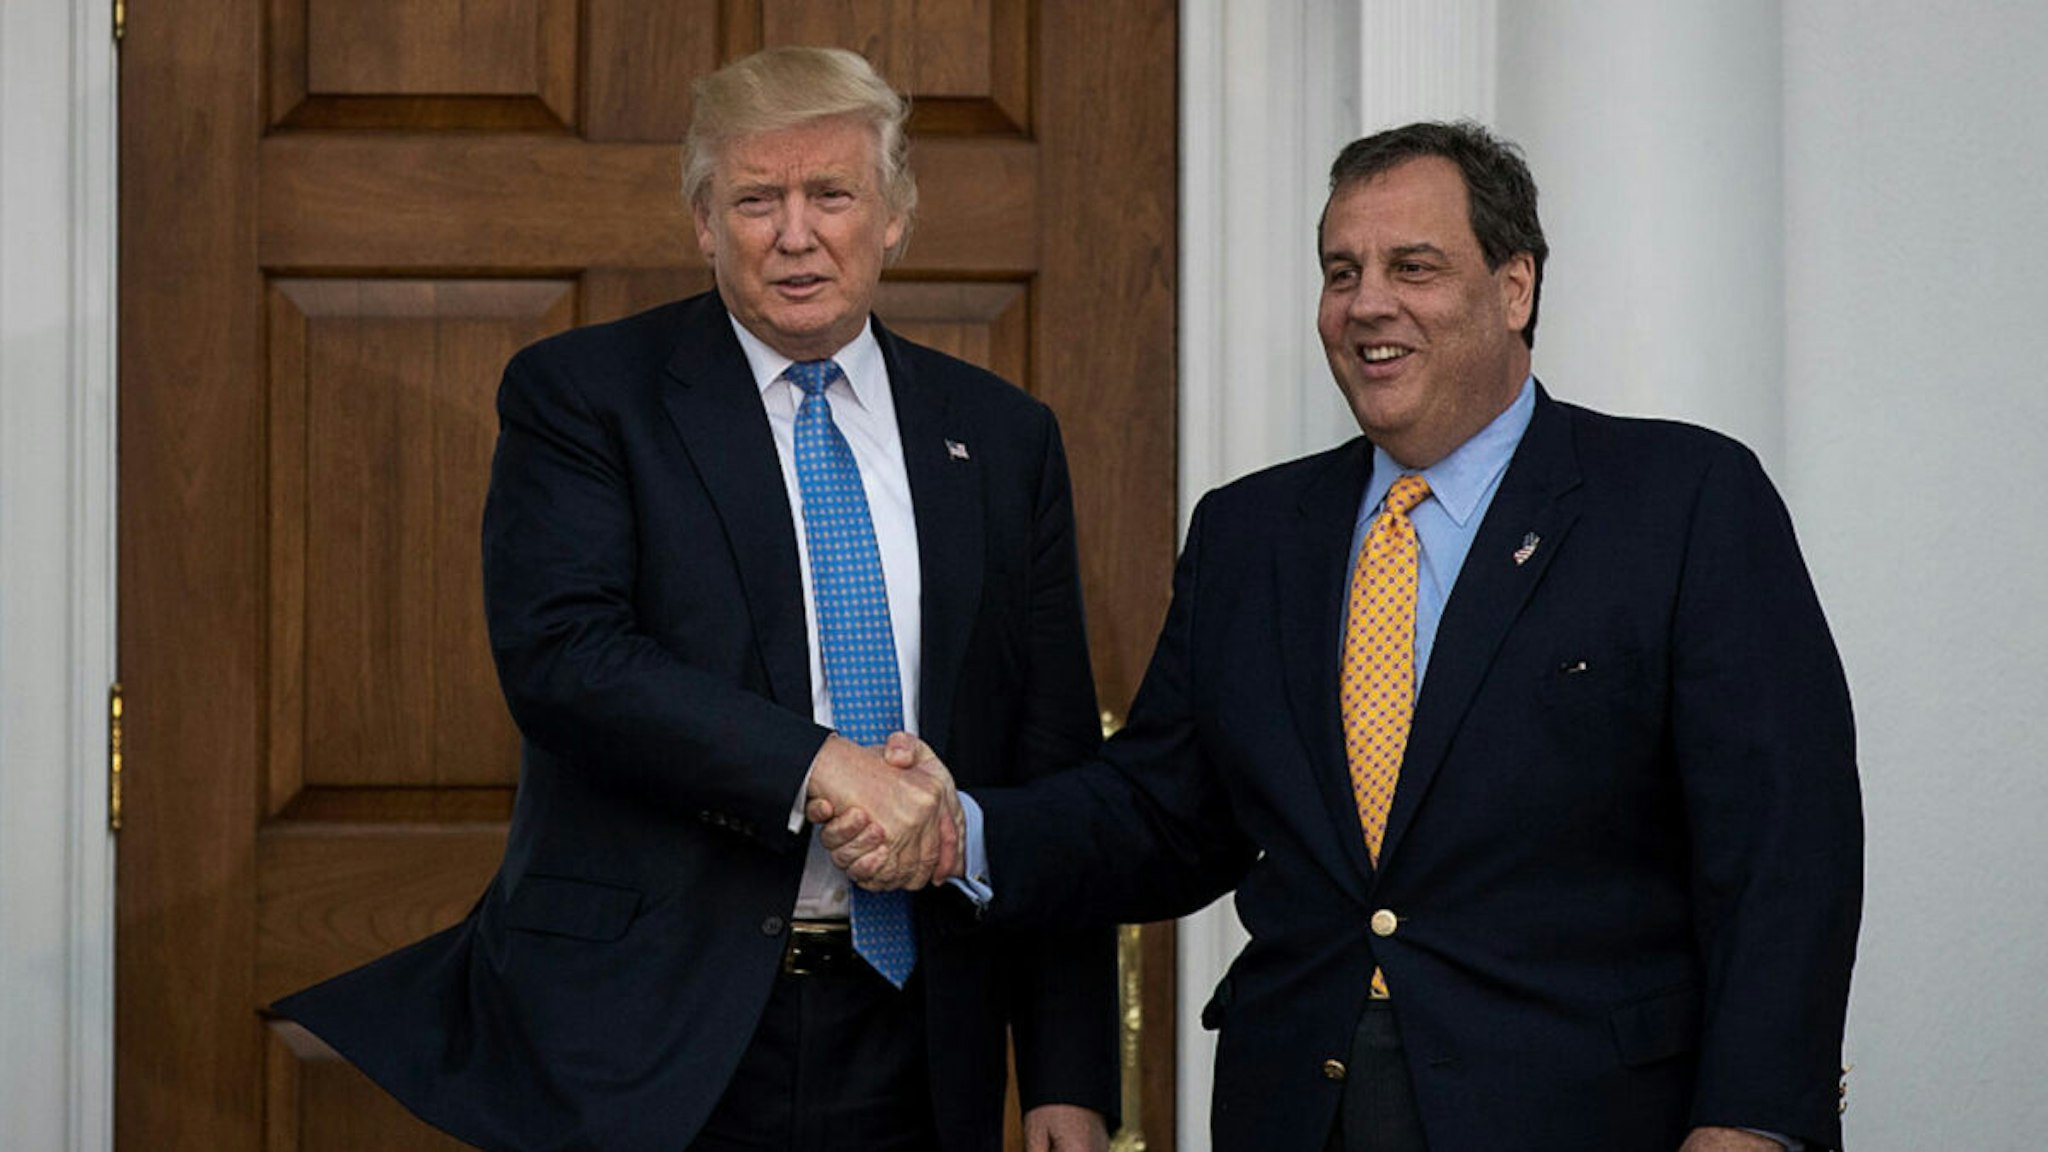 President-elect Donald Trump and New Jersey Governor Chris Christie shake hands before their meeting at Trump International Golf Club, November 20, 2016 in Bedminster Township, New Jersey.